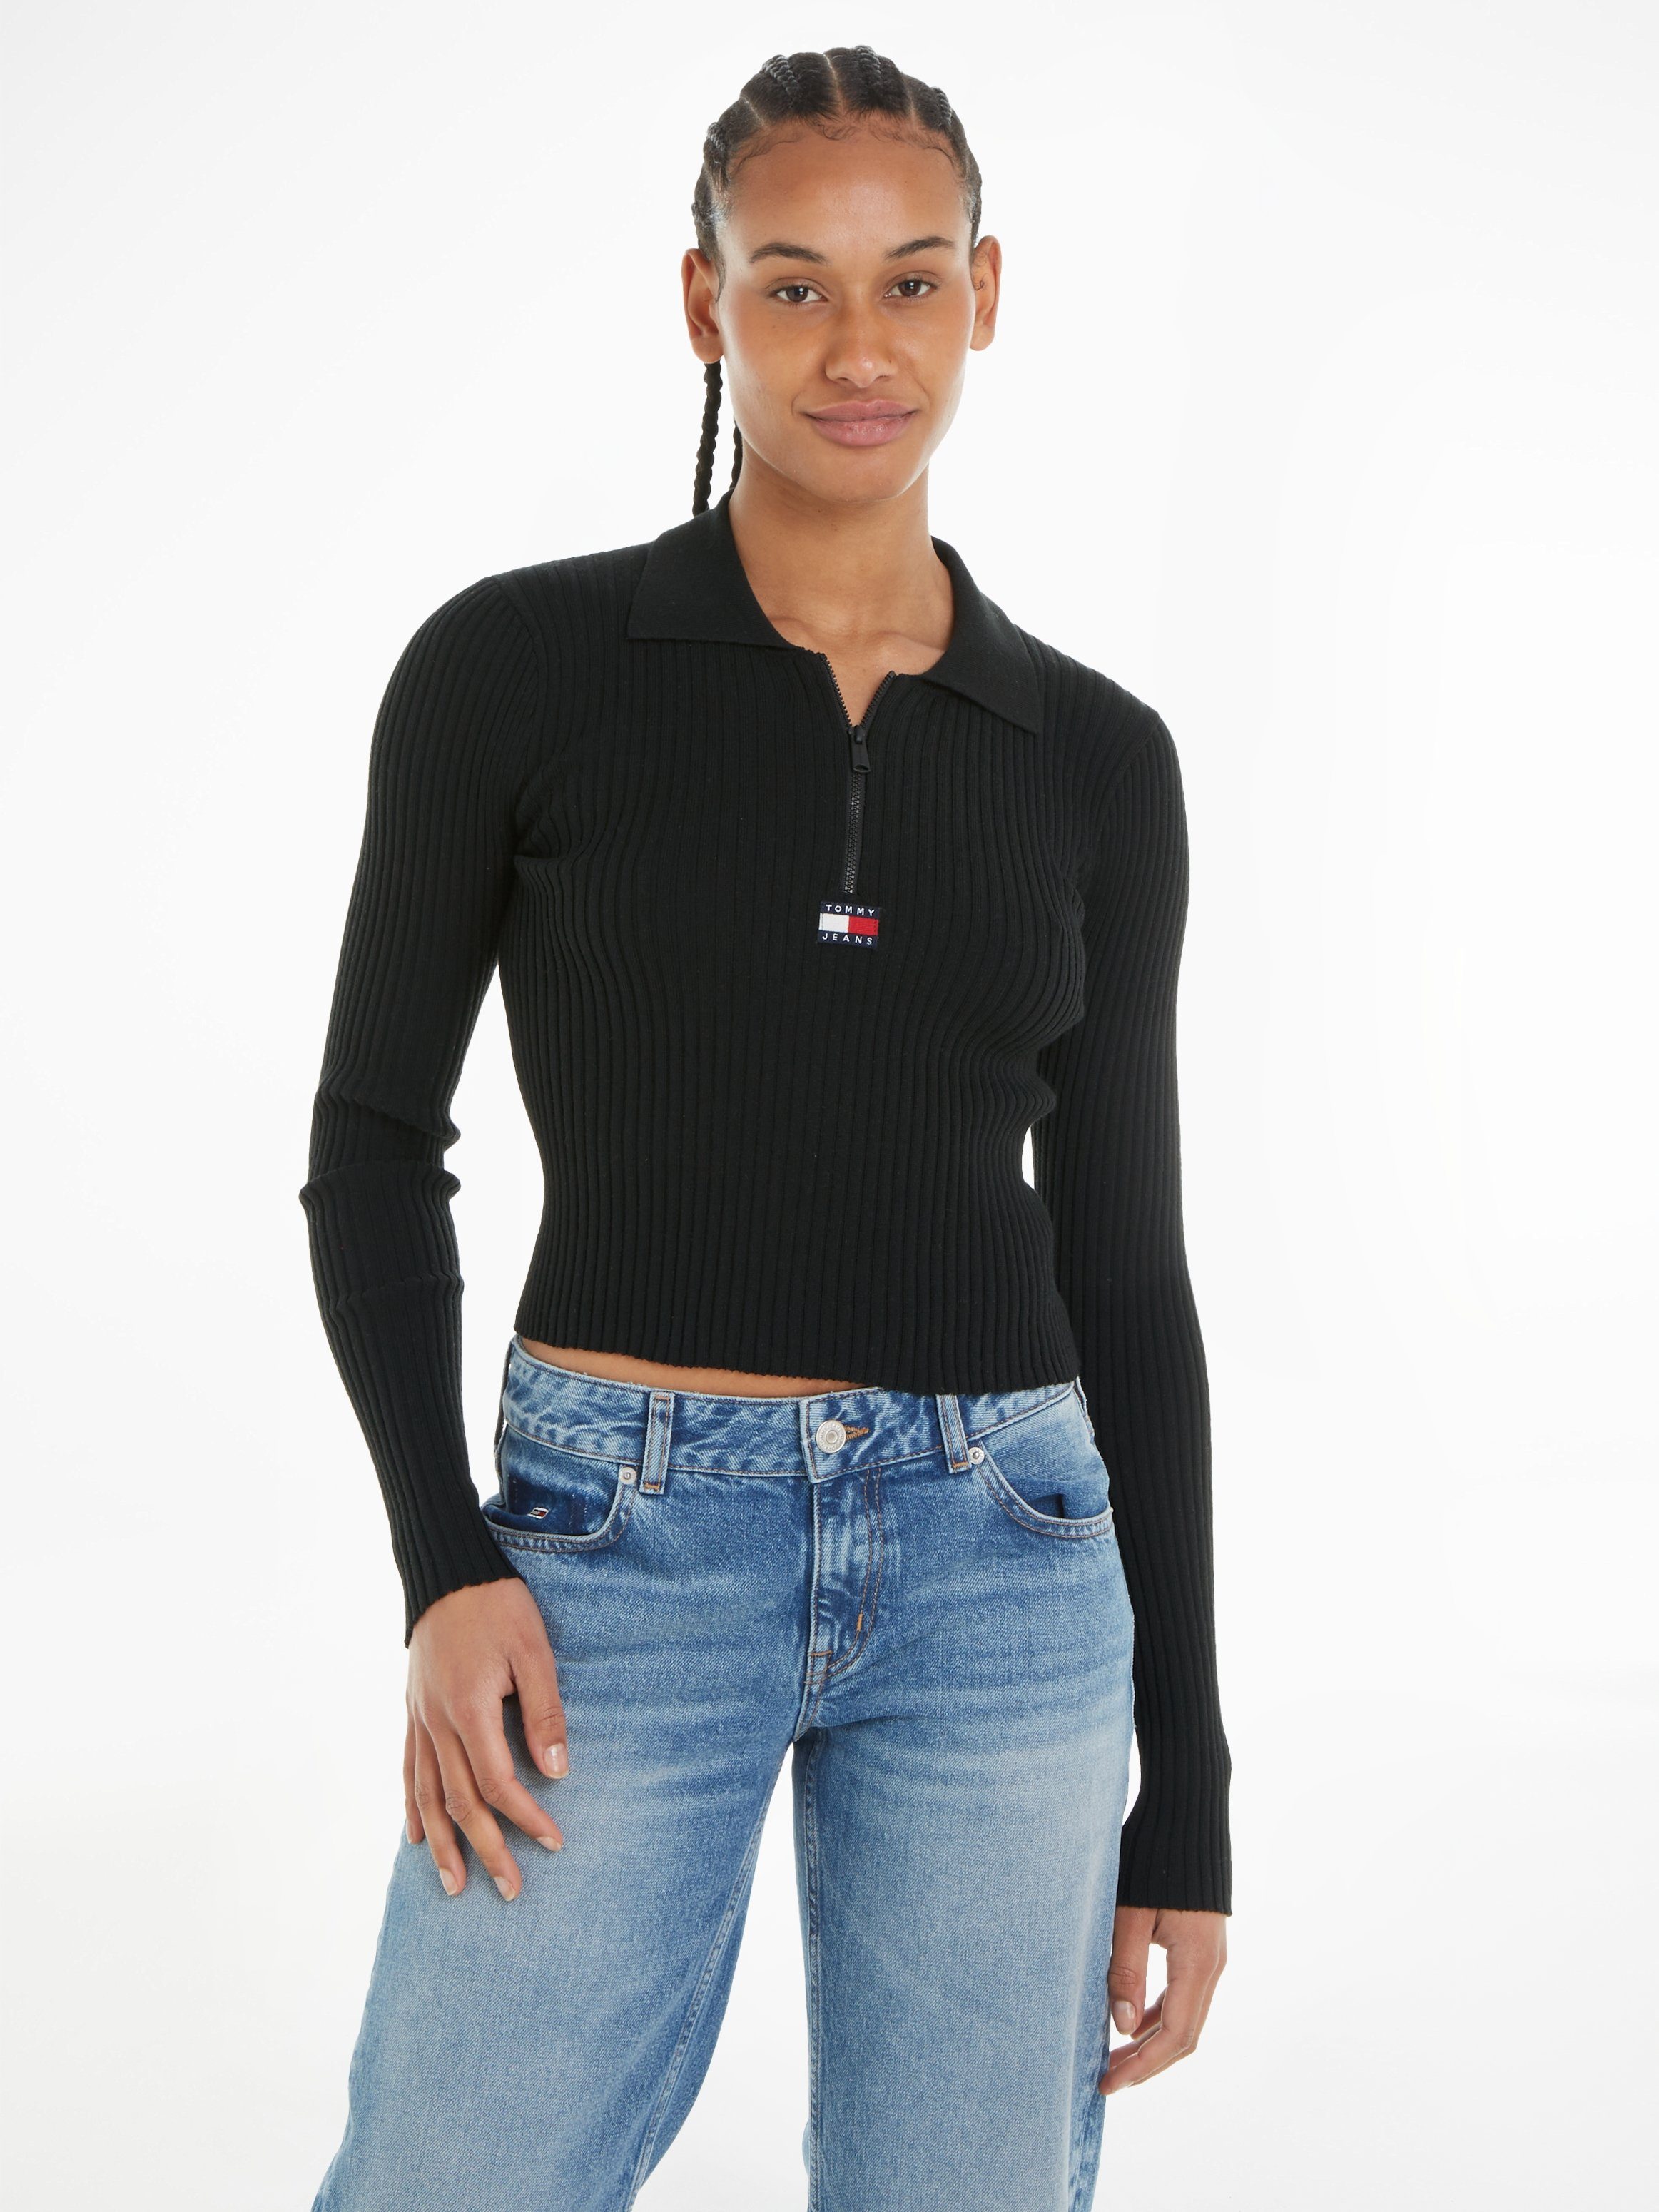 Tommy Tommy Jeans Jeans mit Markenlabel Strickpullover